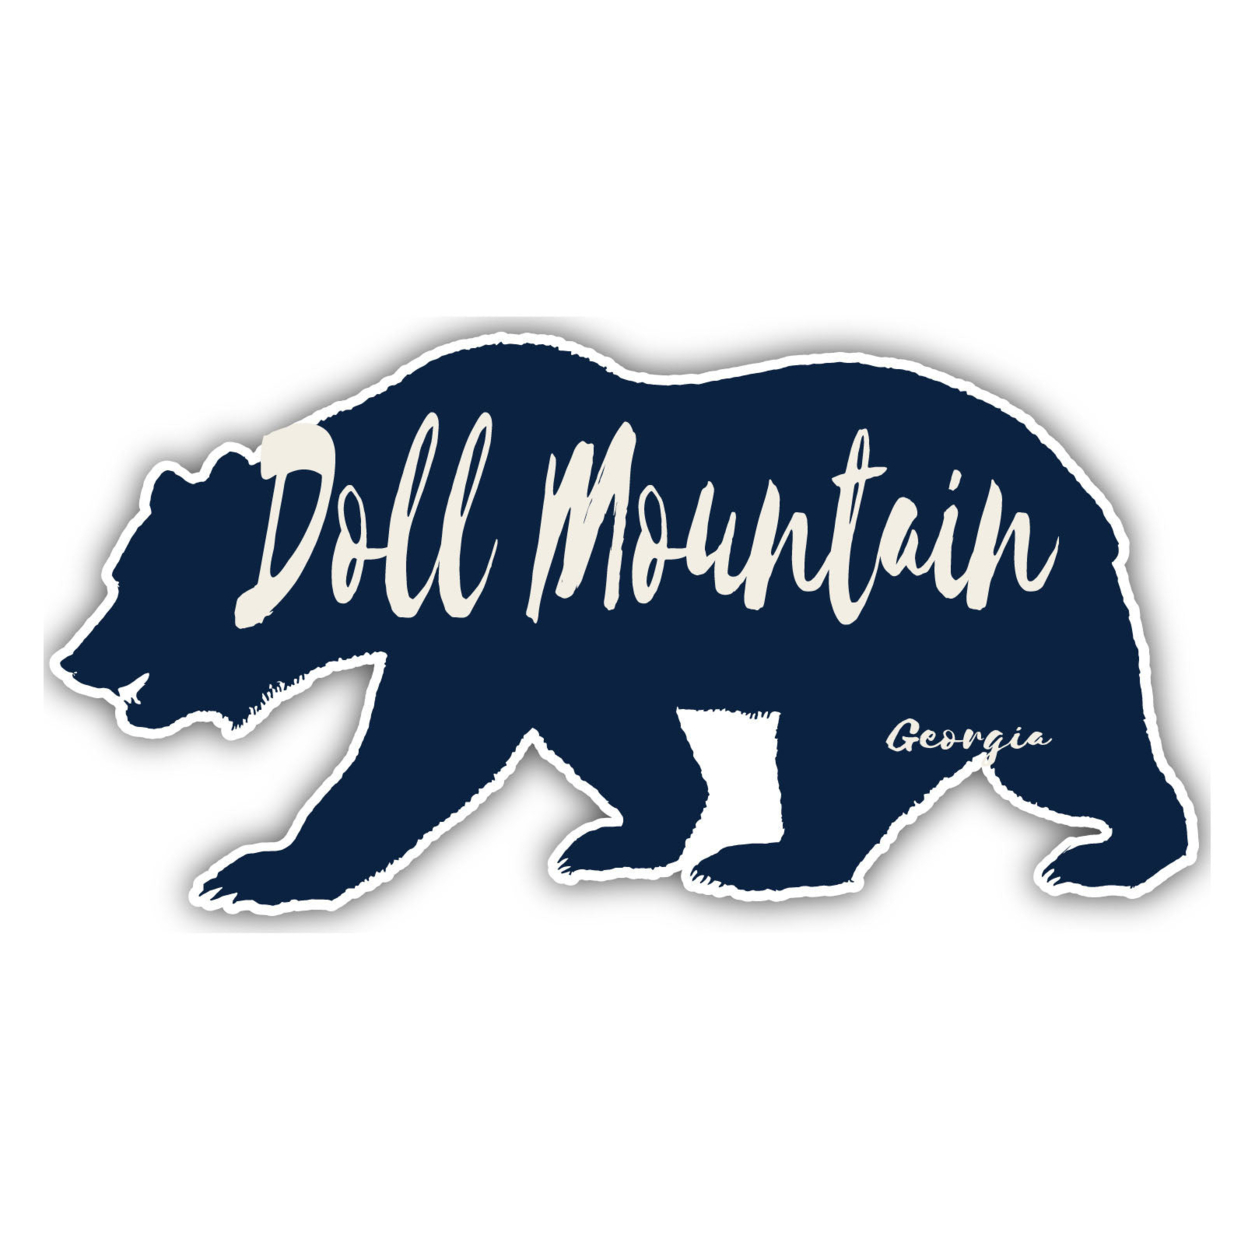 Doll Mountain Georgia Souvenir Decorative Stickers (Choose Theme And Size) - 4-Pack, 12-Inch, Bear